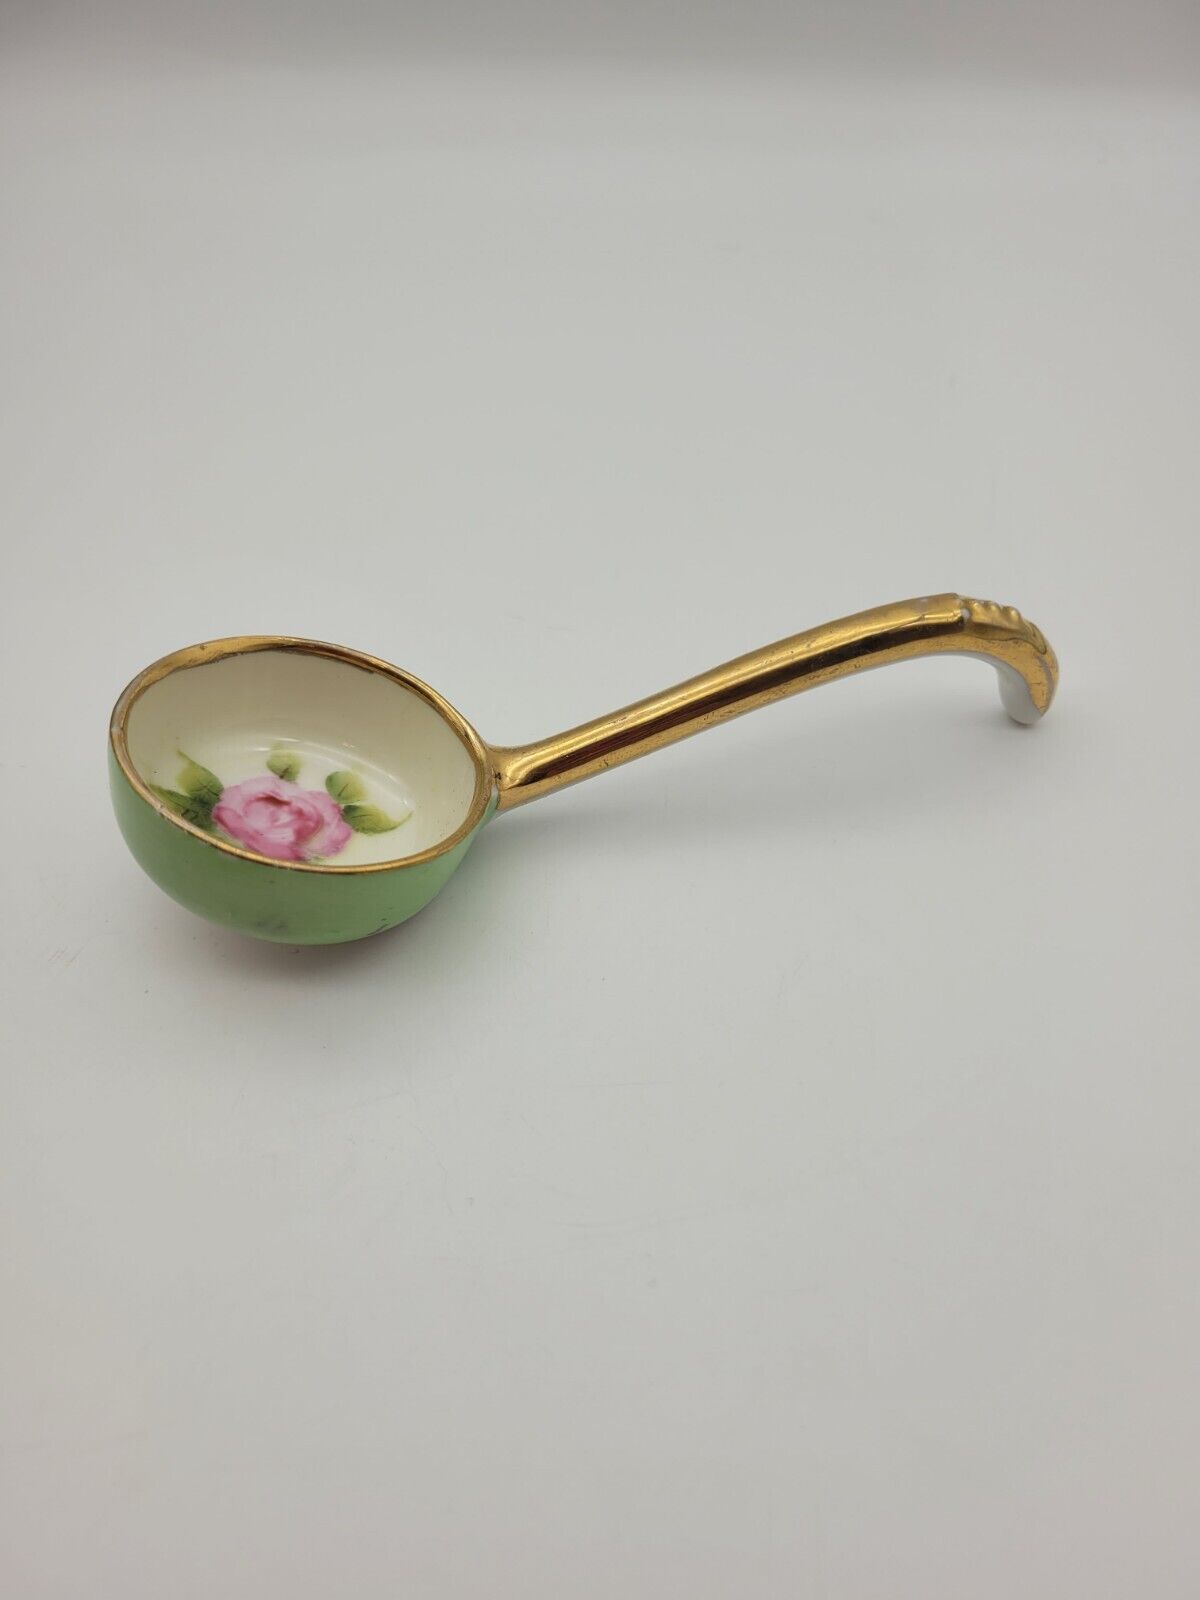 Vintage Noritake Hand Painted Pink Floral Condiment Ladle Spoon Green Gold Trim 